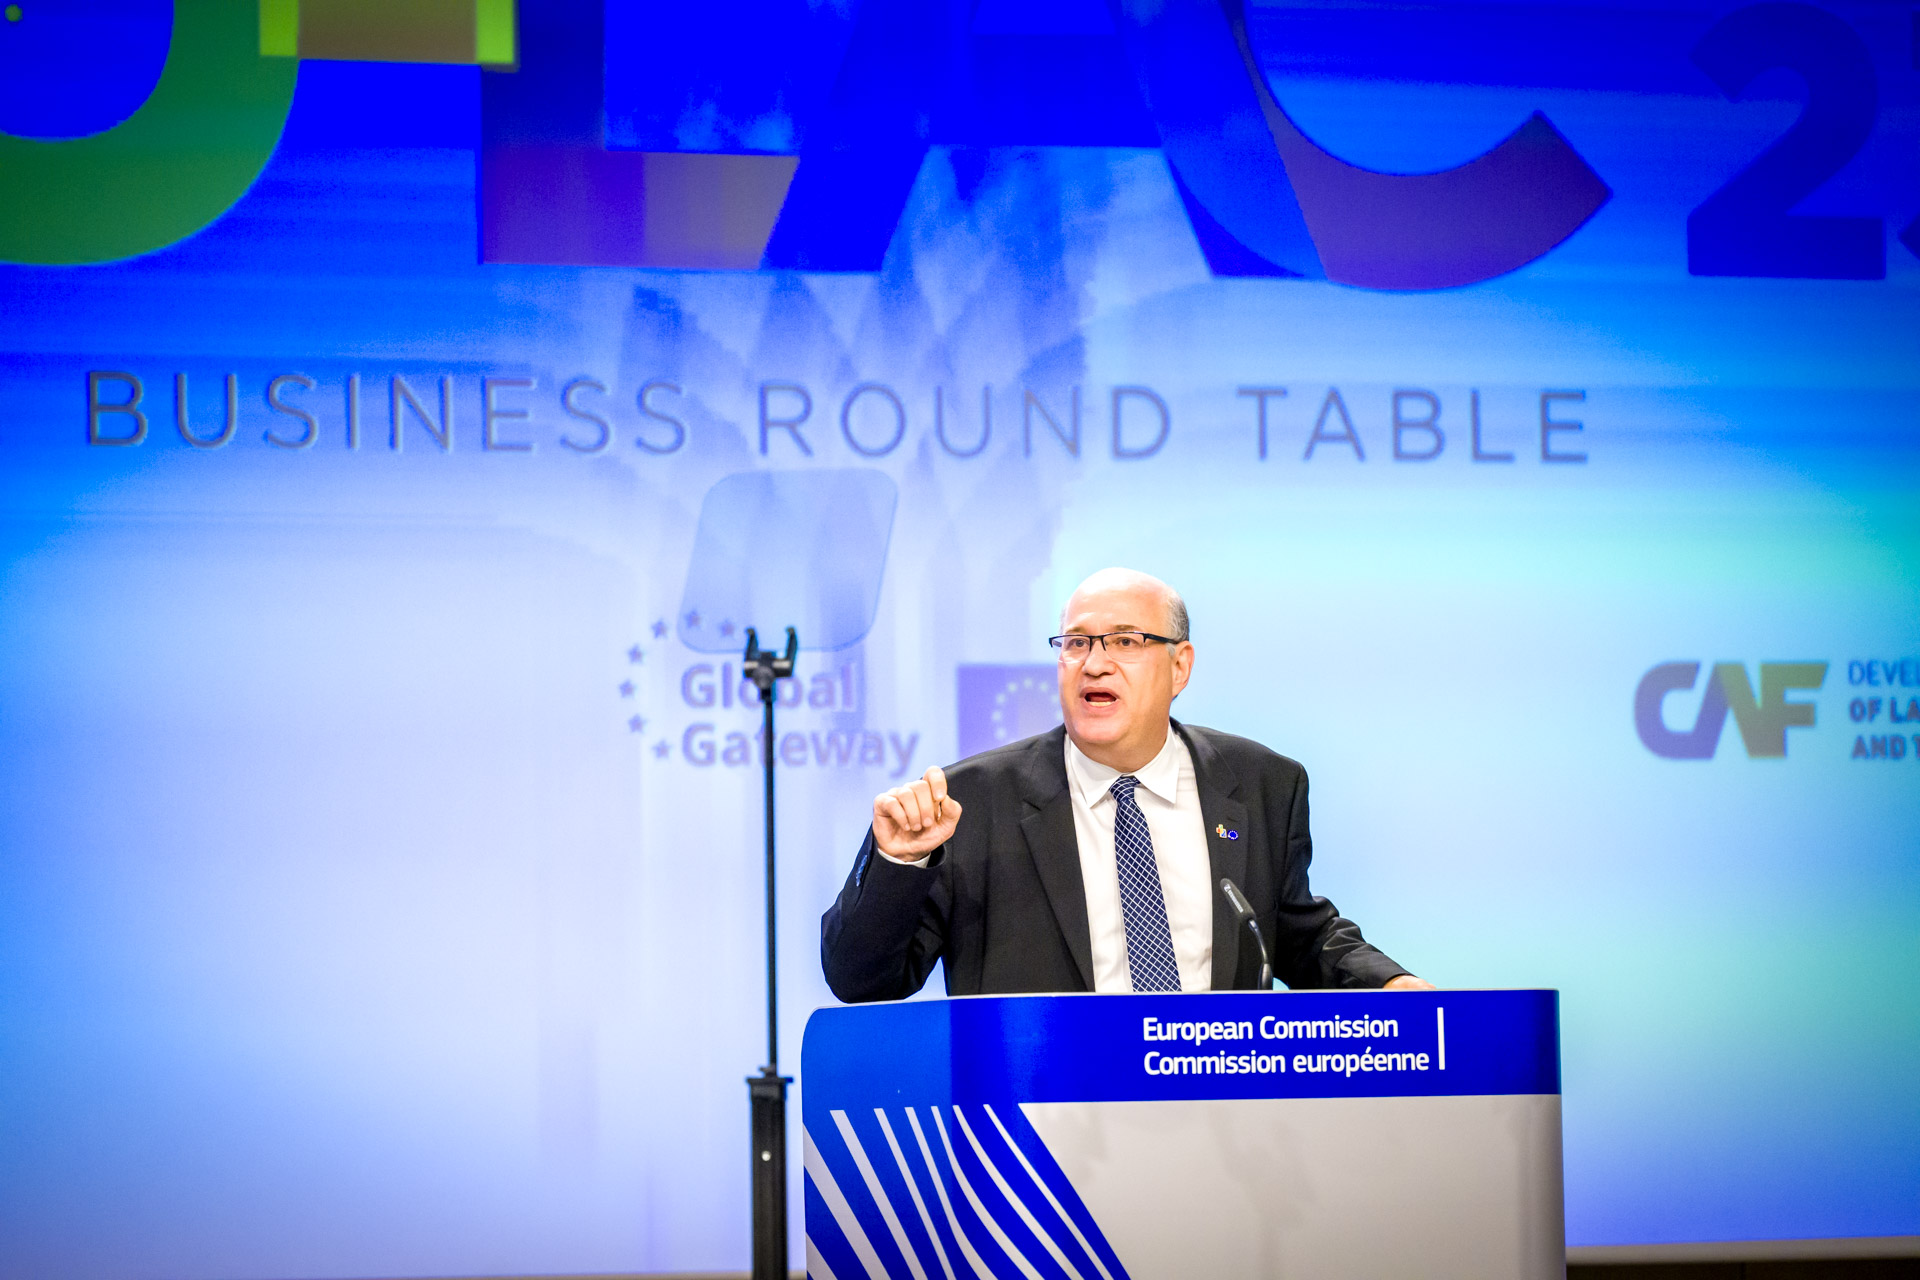 EU-LAC Business Round Table